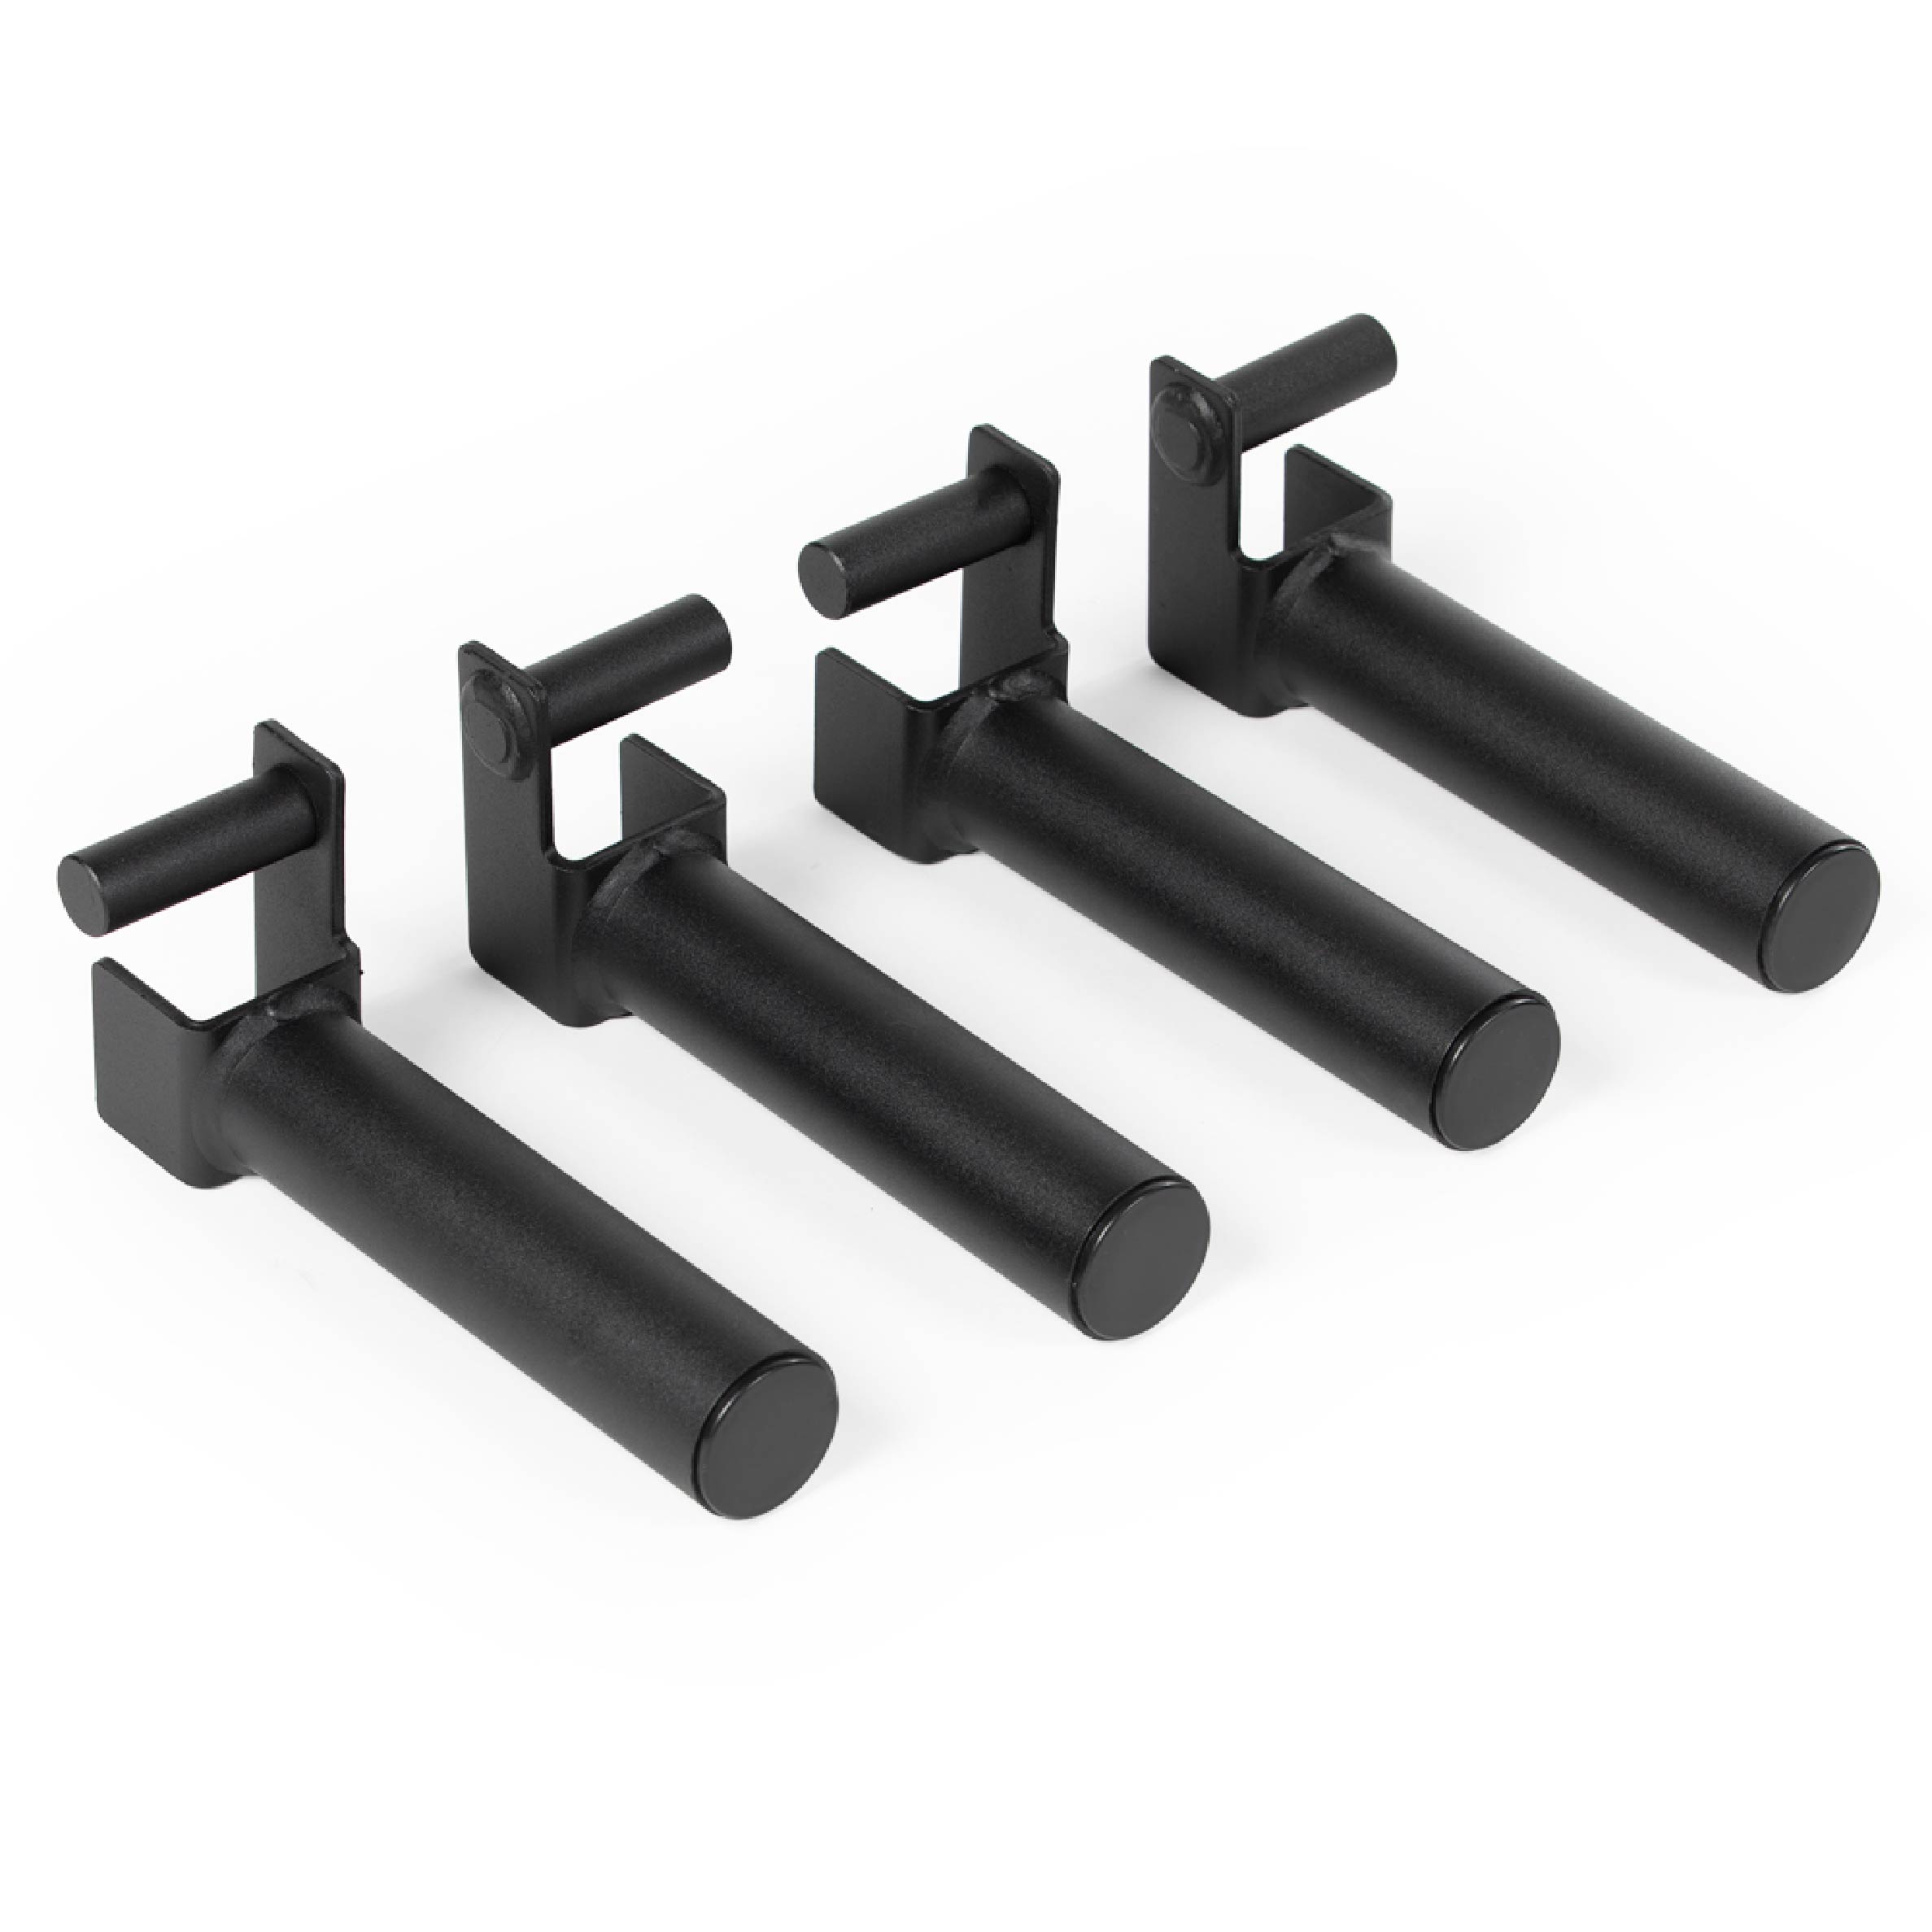 4 Pack T-2 Series Weight Plate Holder Attachments - J-Hook Style Mounting -  Weight Plate Storage